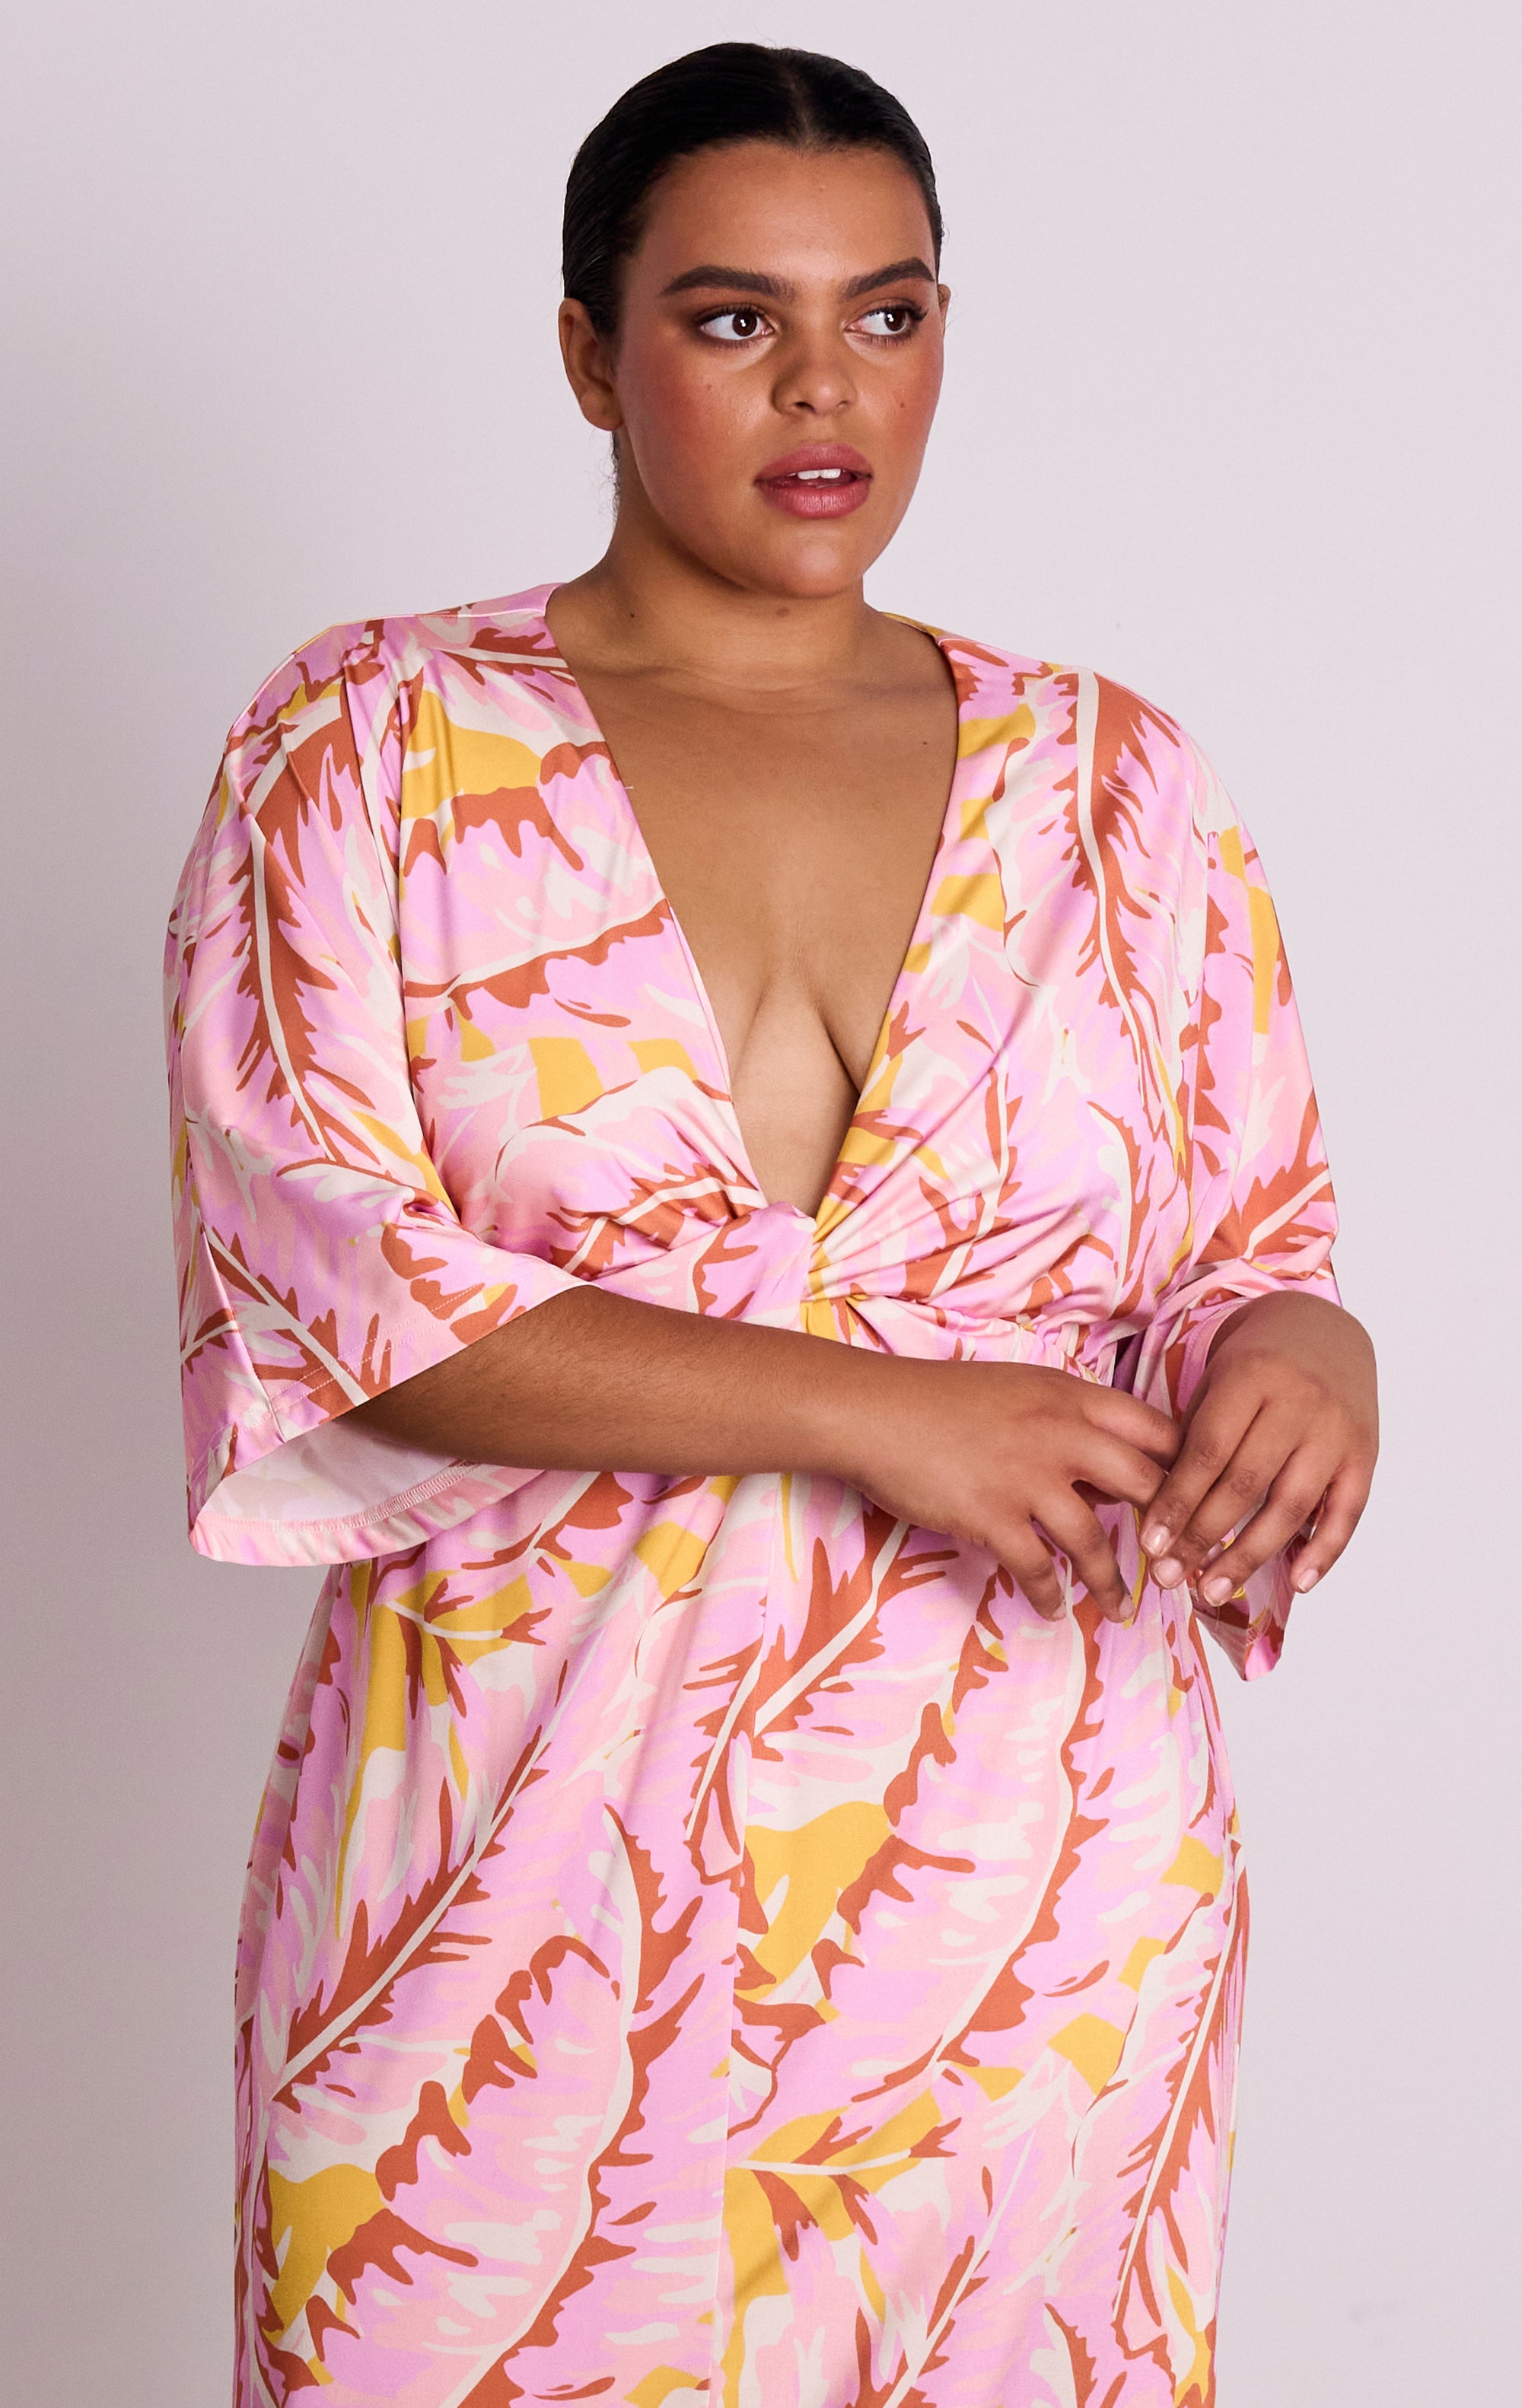 Sweet Nothings Drape Midi - TAKE 40% OFF DISCOUNT APPLIED AT CHECKOUT